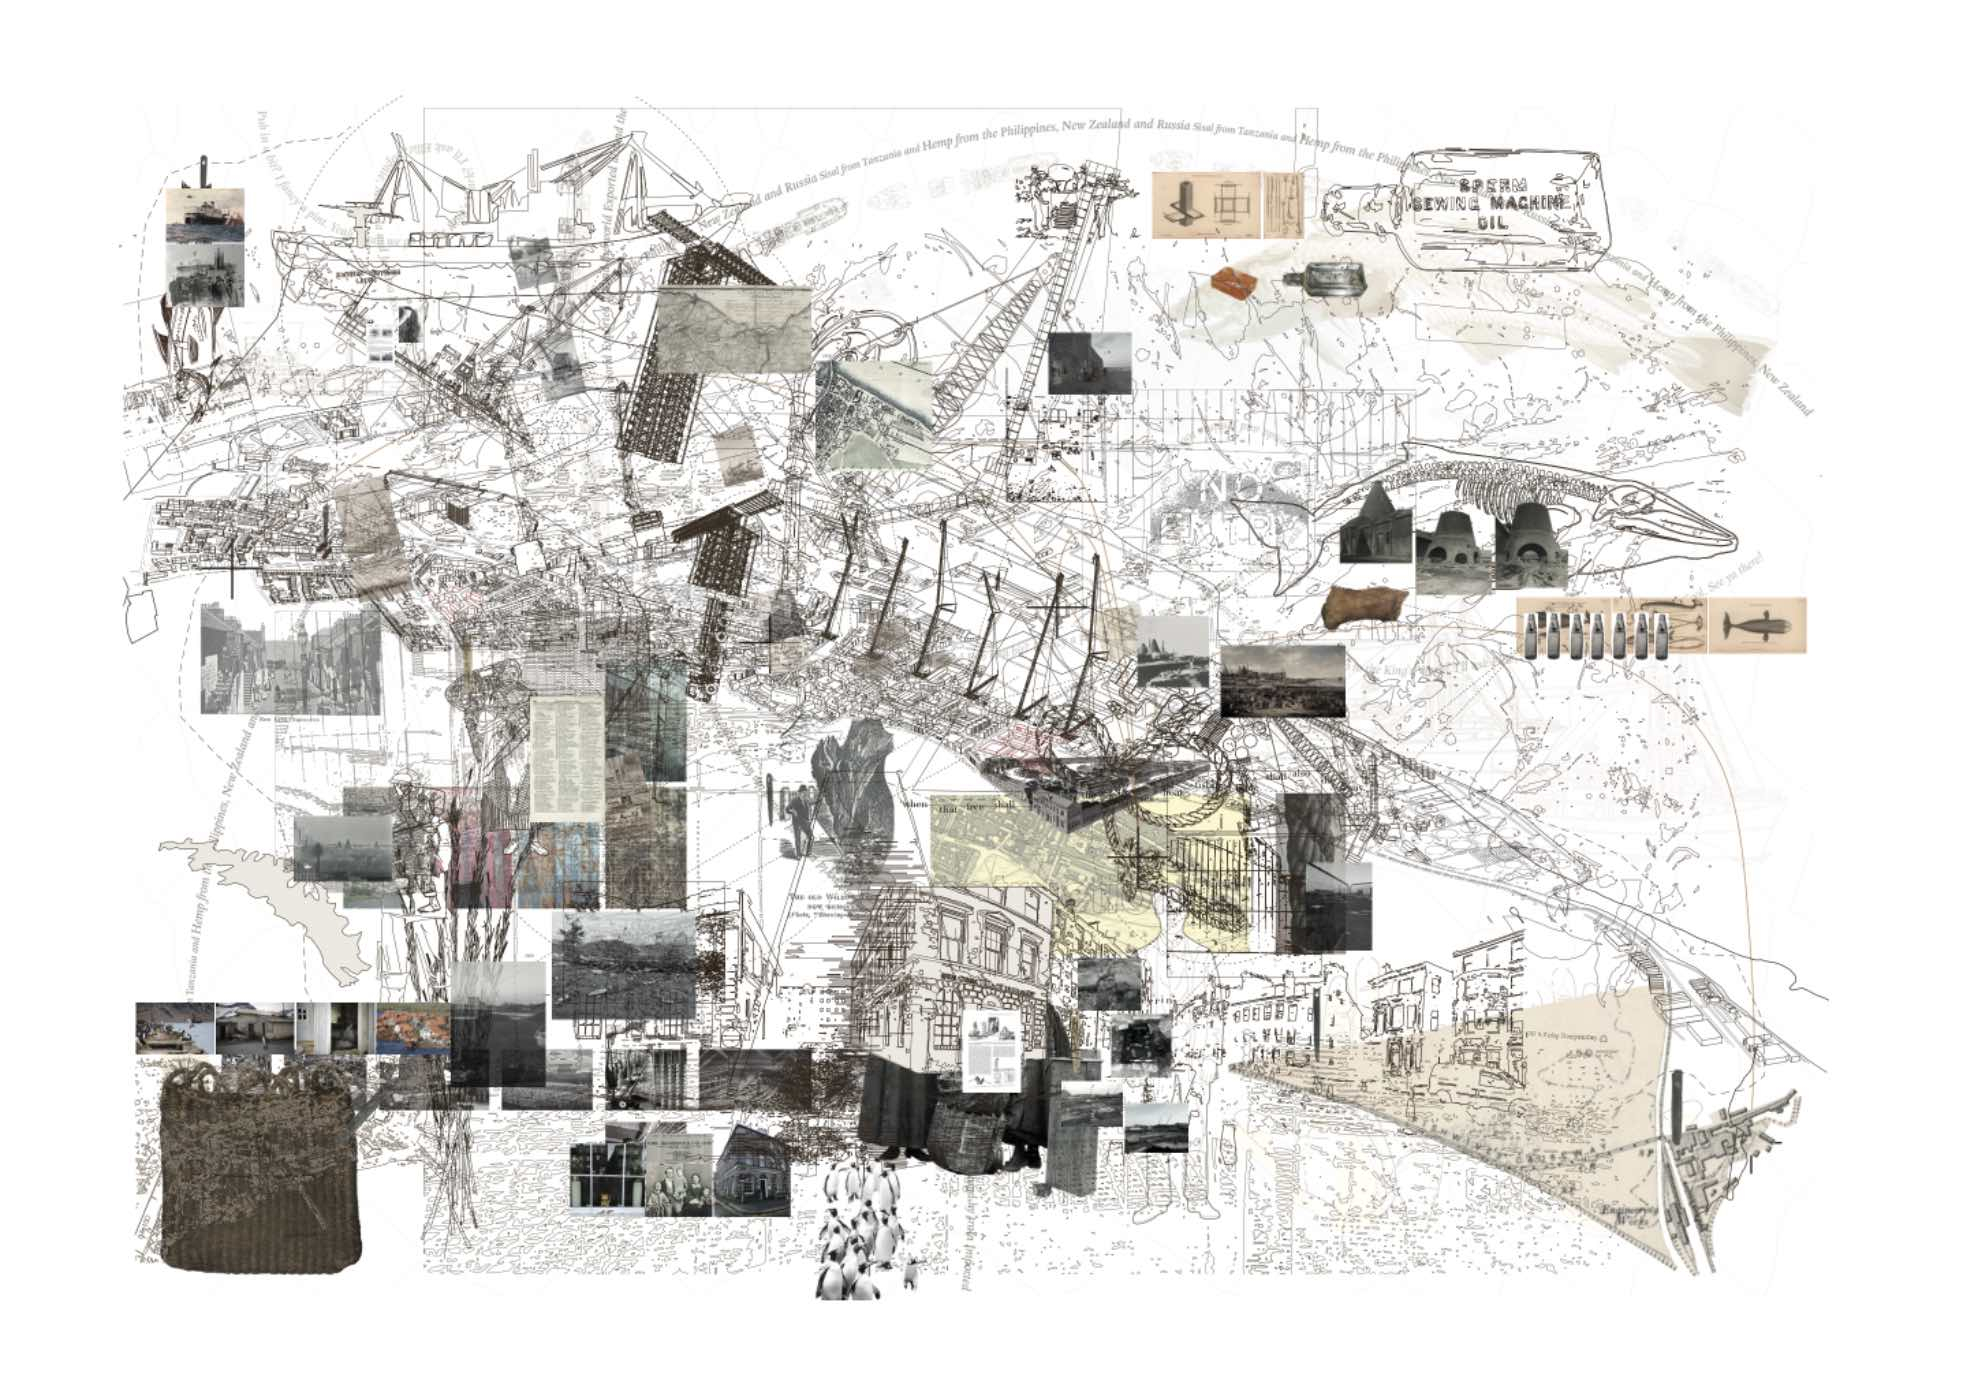 Collage map of Leith, overlapping industrial histories